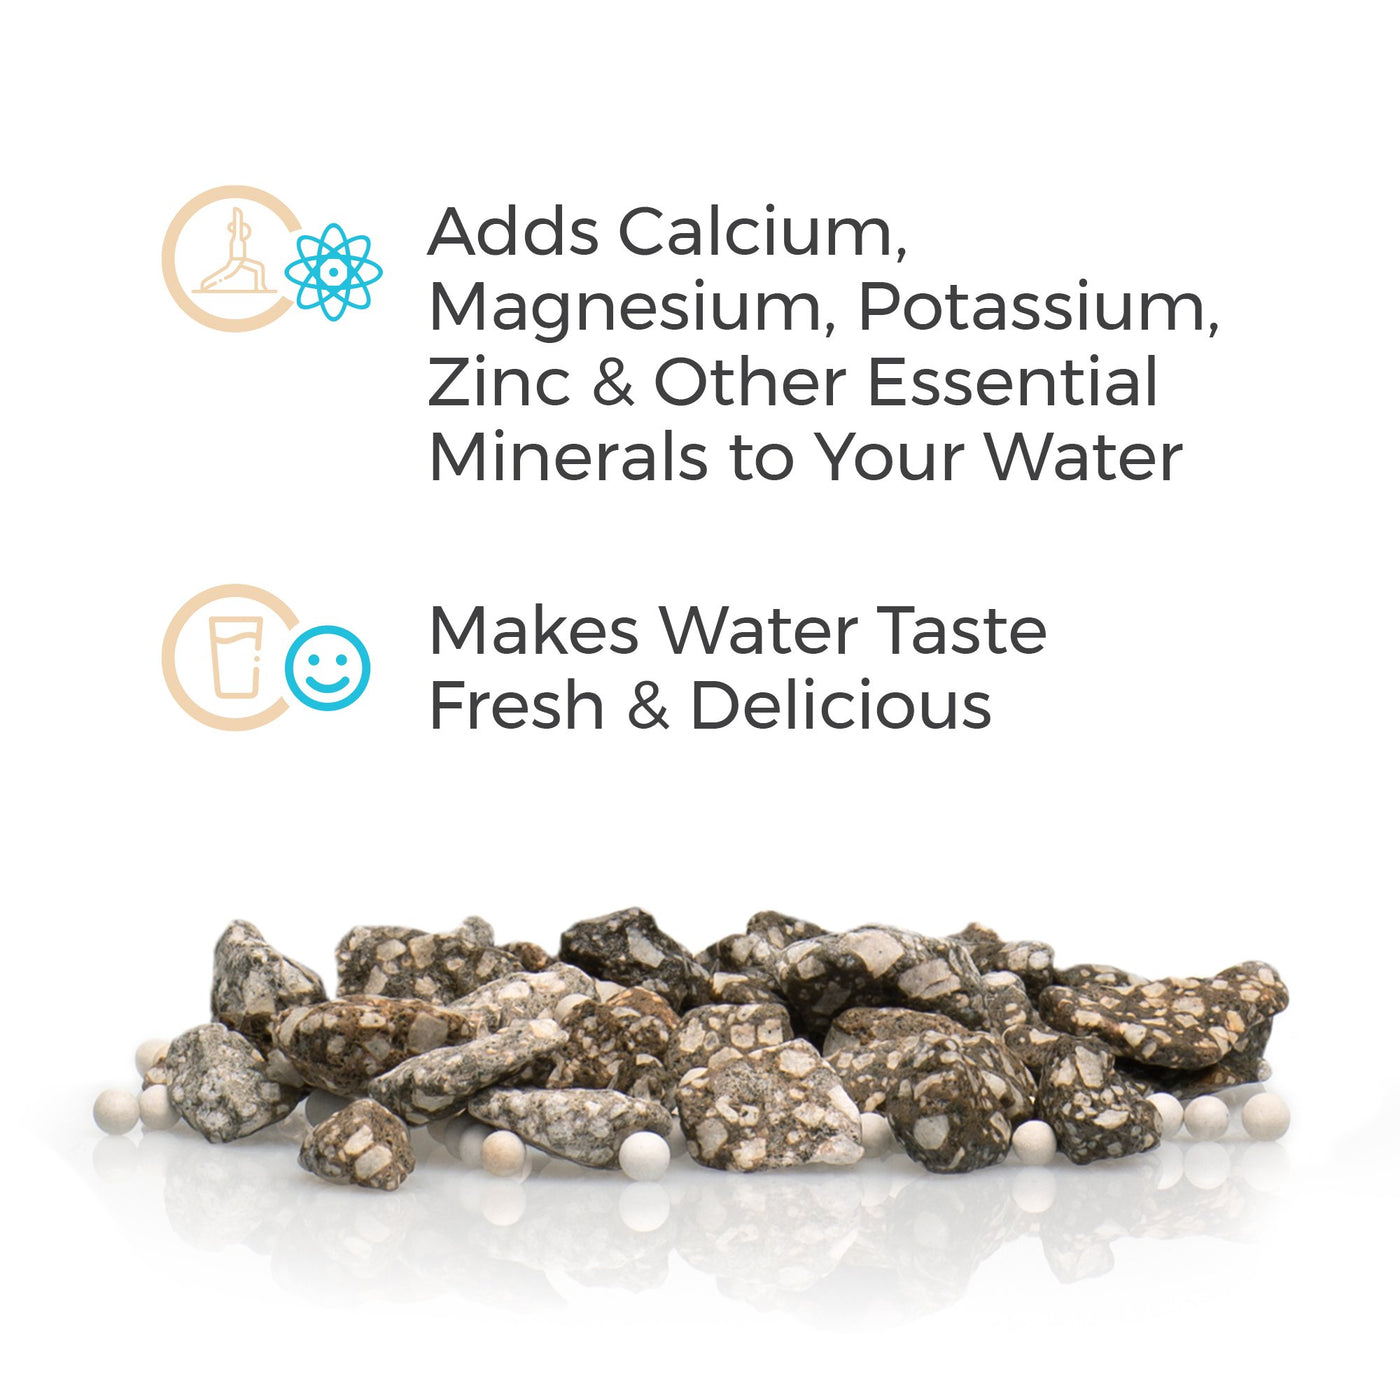 The Santevia Gravity Water System Mineral Stones add calcium, magnesium, potassium, zinc and other essential minerals to your water.